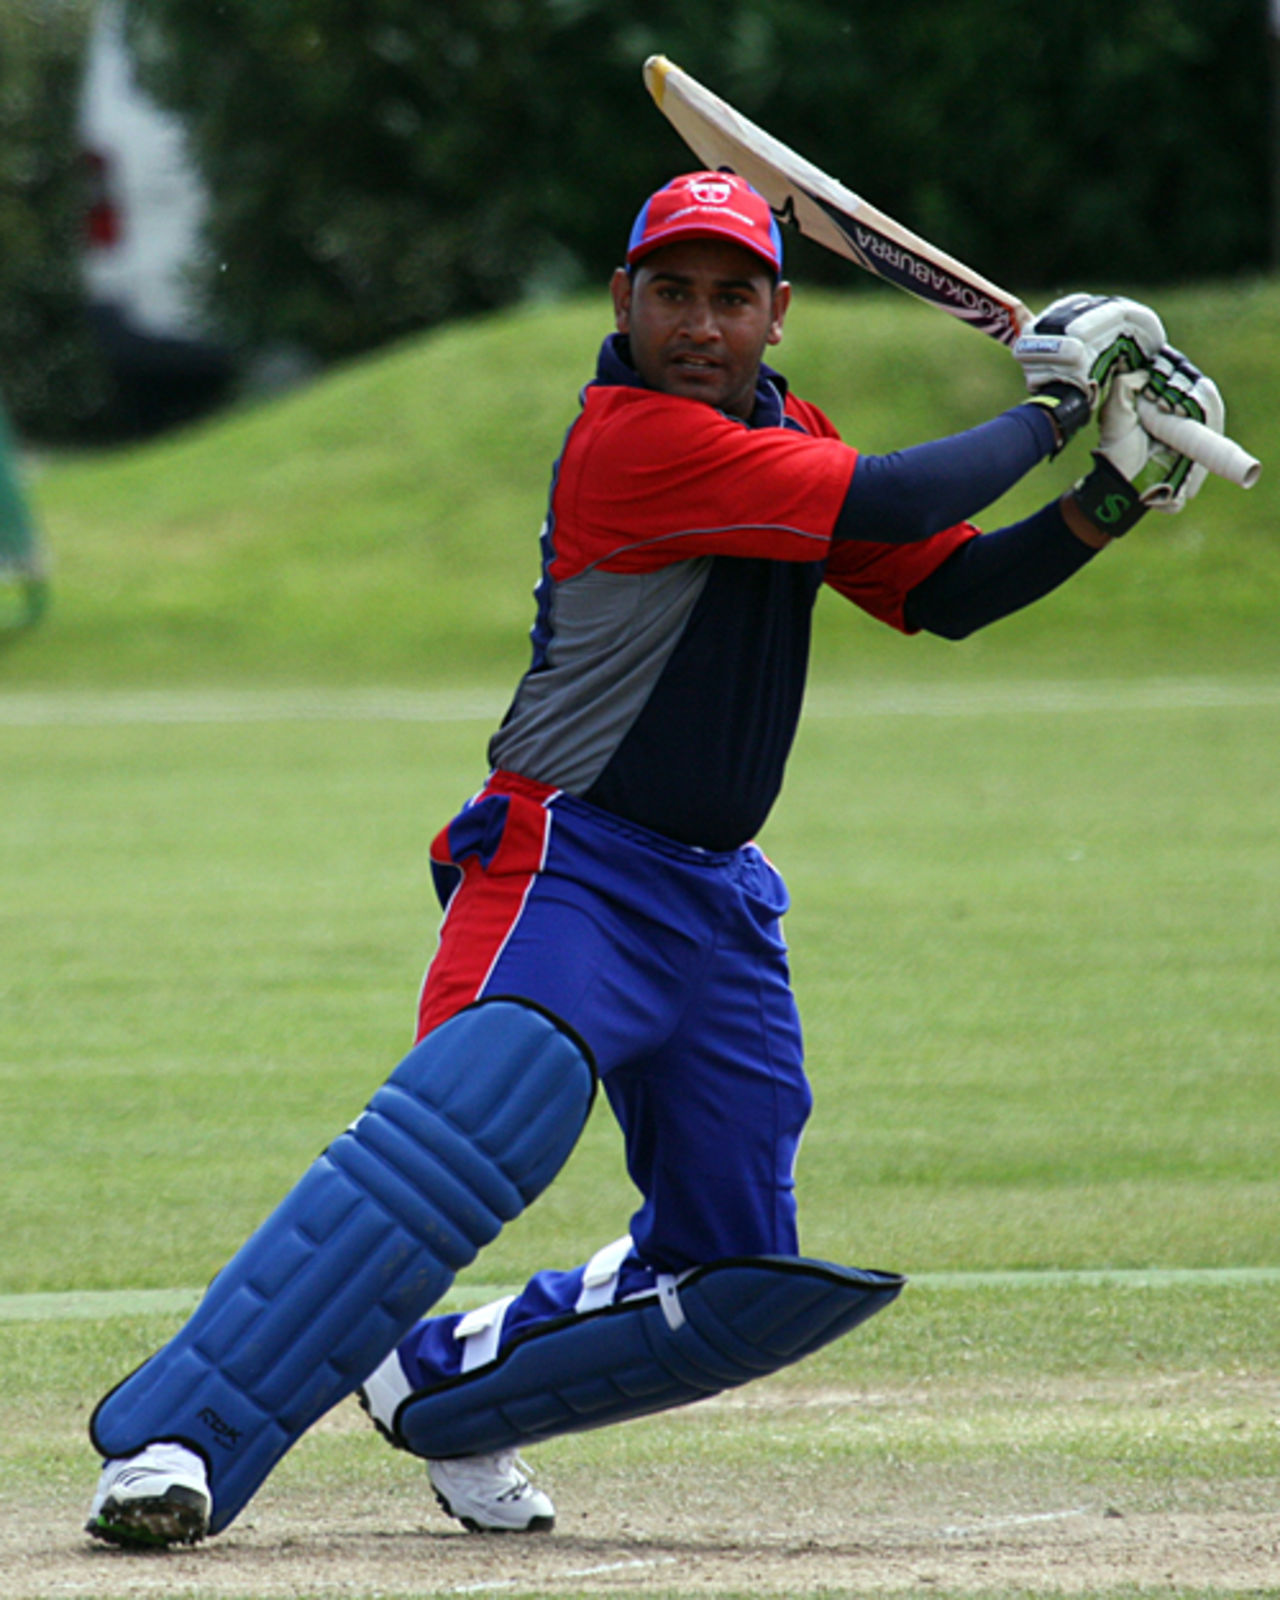 Adil Hanif smashes it through the off side, Bahrain v Gibraltar, ICC World Cricket League Division 7, Castel, May 19, 2009